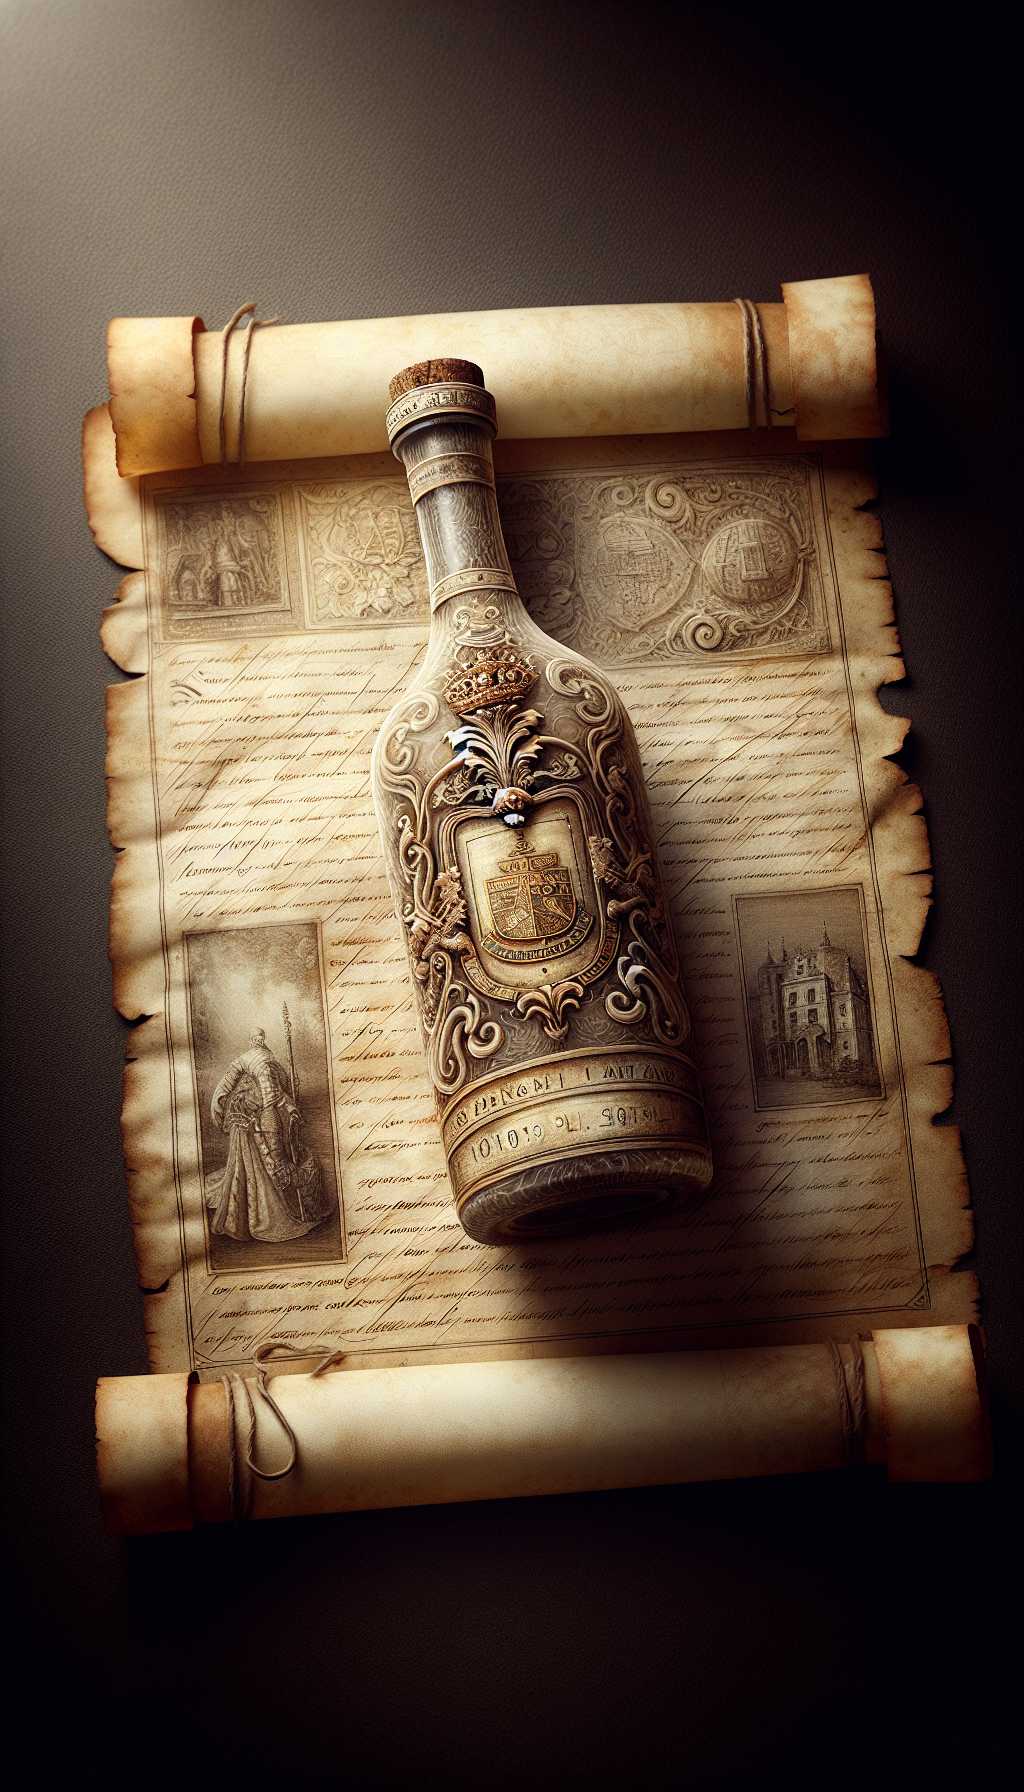 An antique bottle sits atop an ancient scroll, its label worn but bearing a prominent, prestigious vineyard's crest. Delicate, translucent lines of lineage trace from the bottle to key historical events depicted in faint vignettes within the scroll's unfurling edges. Intricate baroque patterns frame the peculiar treasure, symbolizing its provenance and its weight in the valuation of bygone treasures.